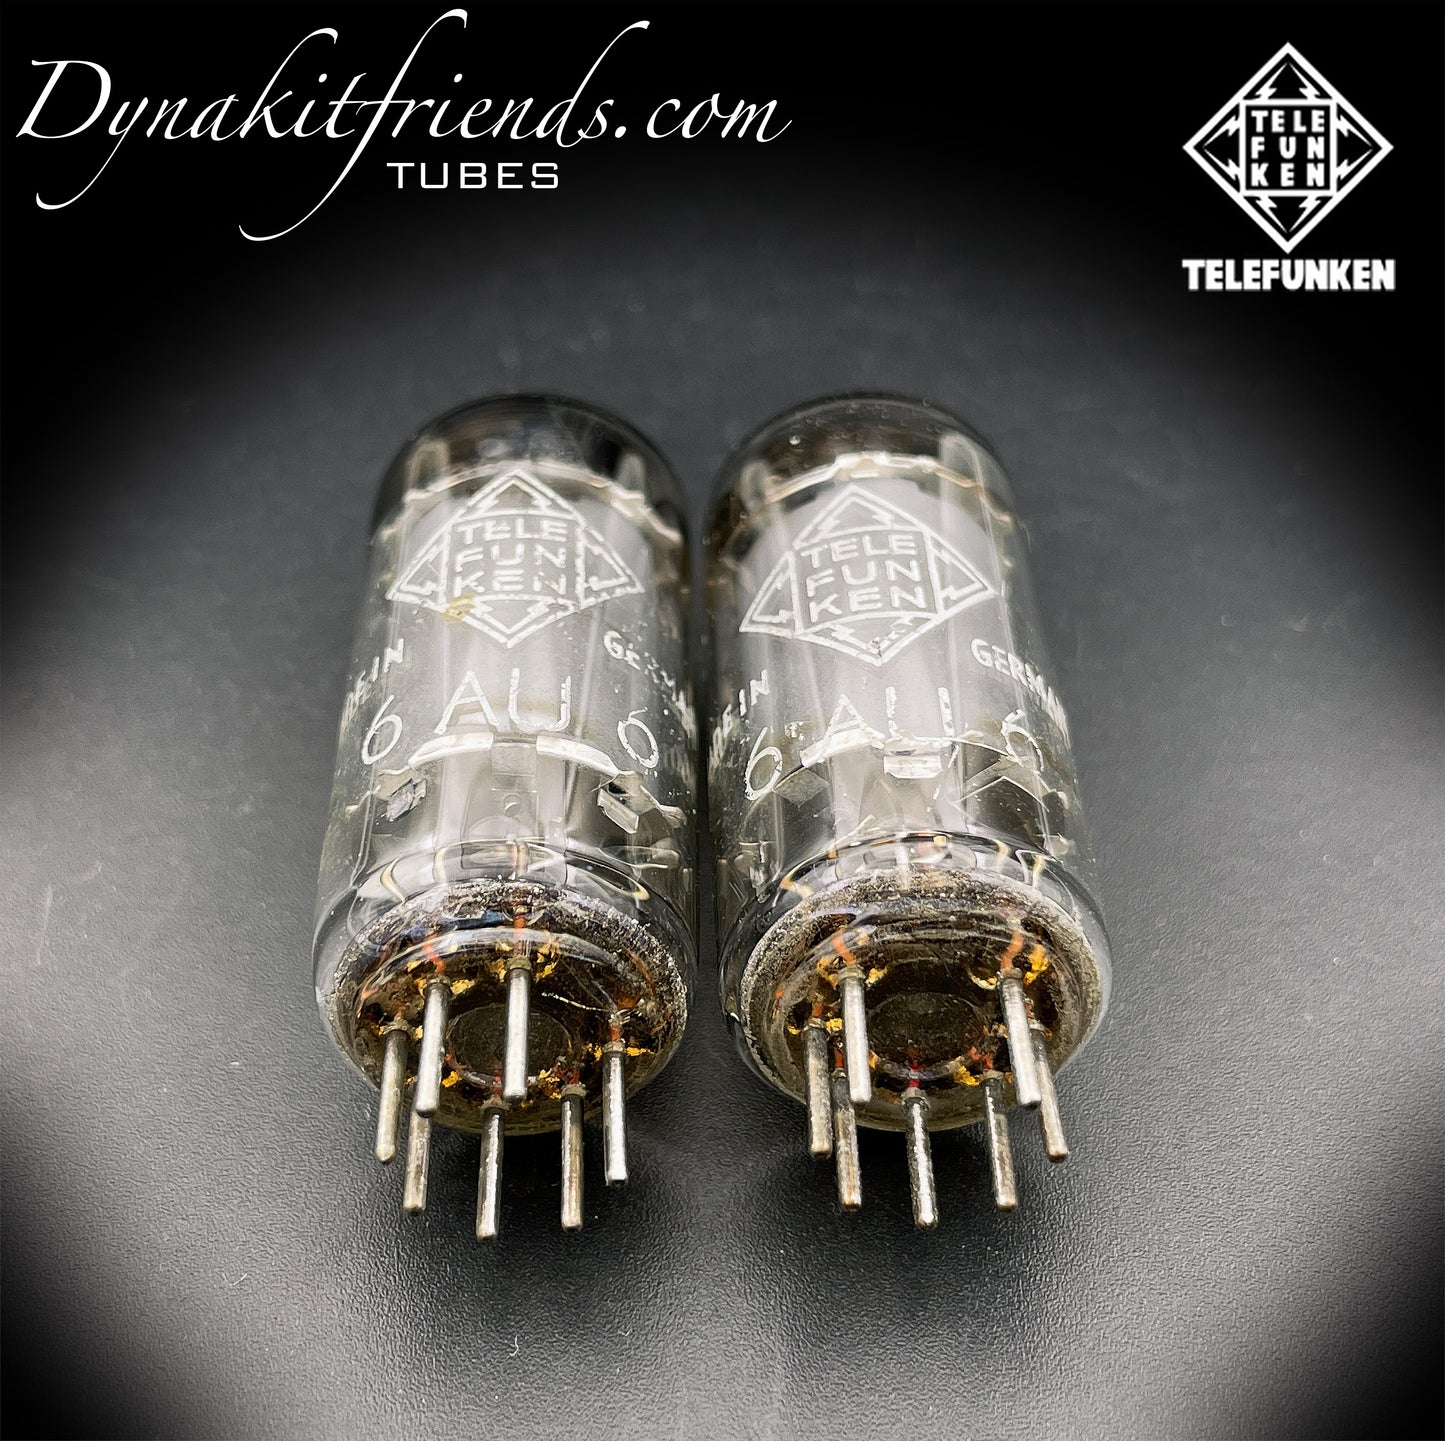 6AU6 ( EF94 ) Telefunken <> Diamond bottom Same Codes Gray Plates Square Getter Matched Tubes Made in Germany